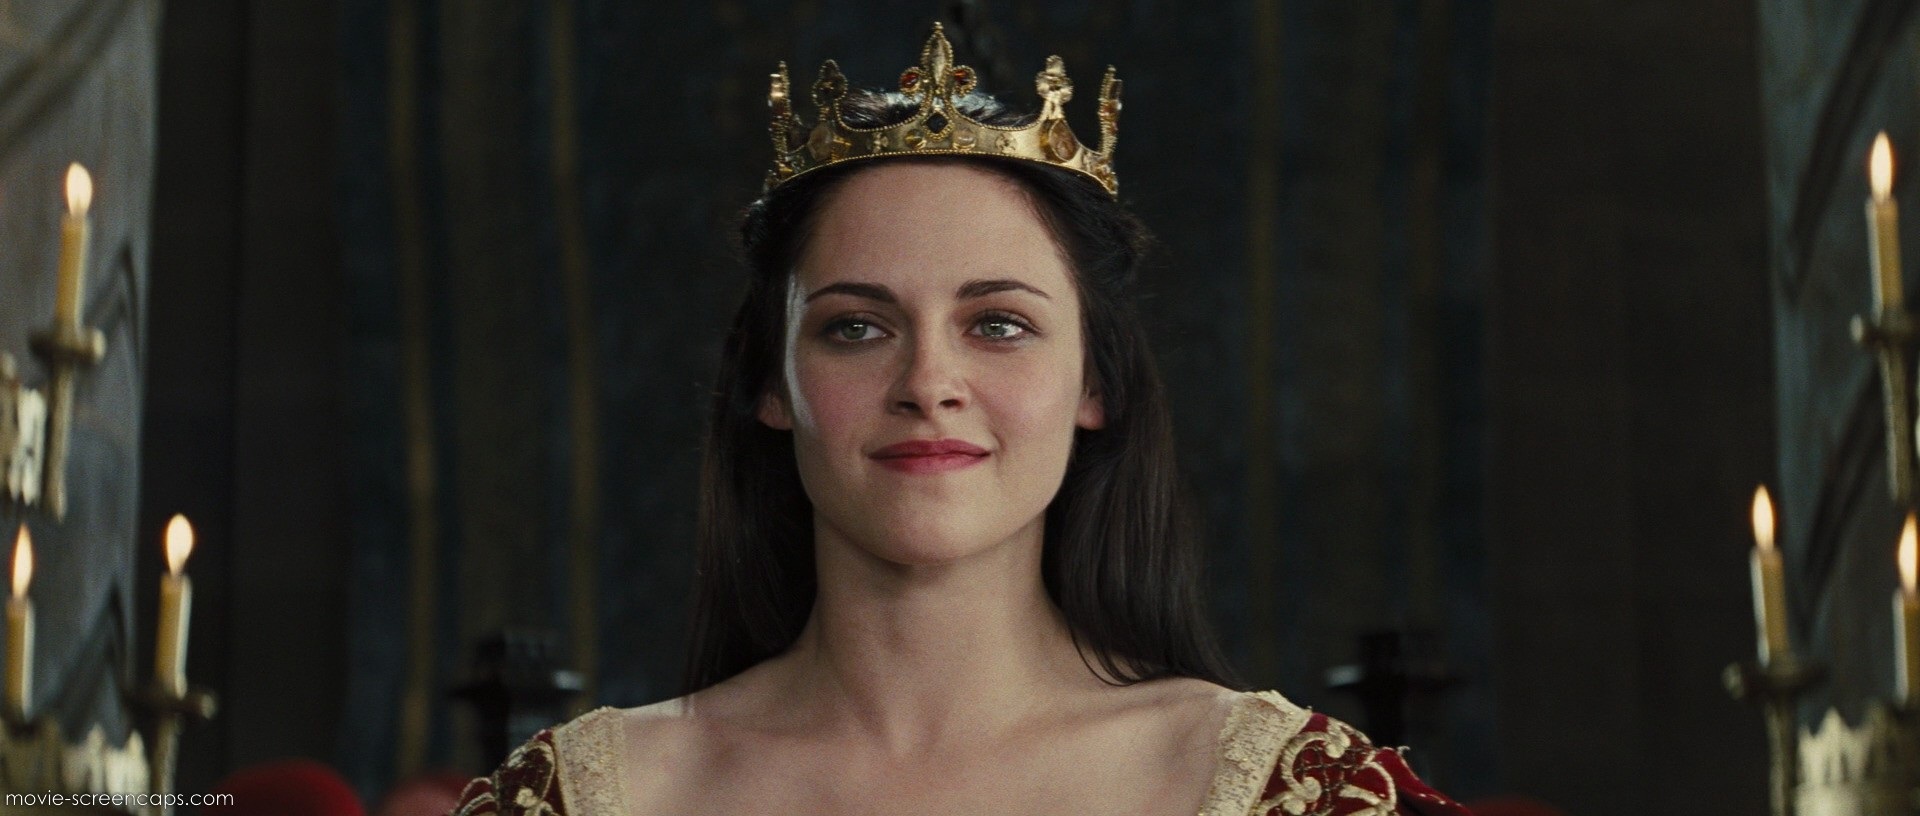 User Blogjuliapiercefavorite Character Snow White And The Huntsman